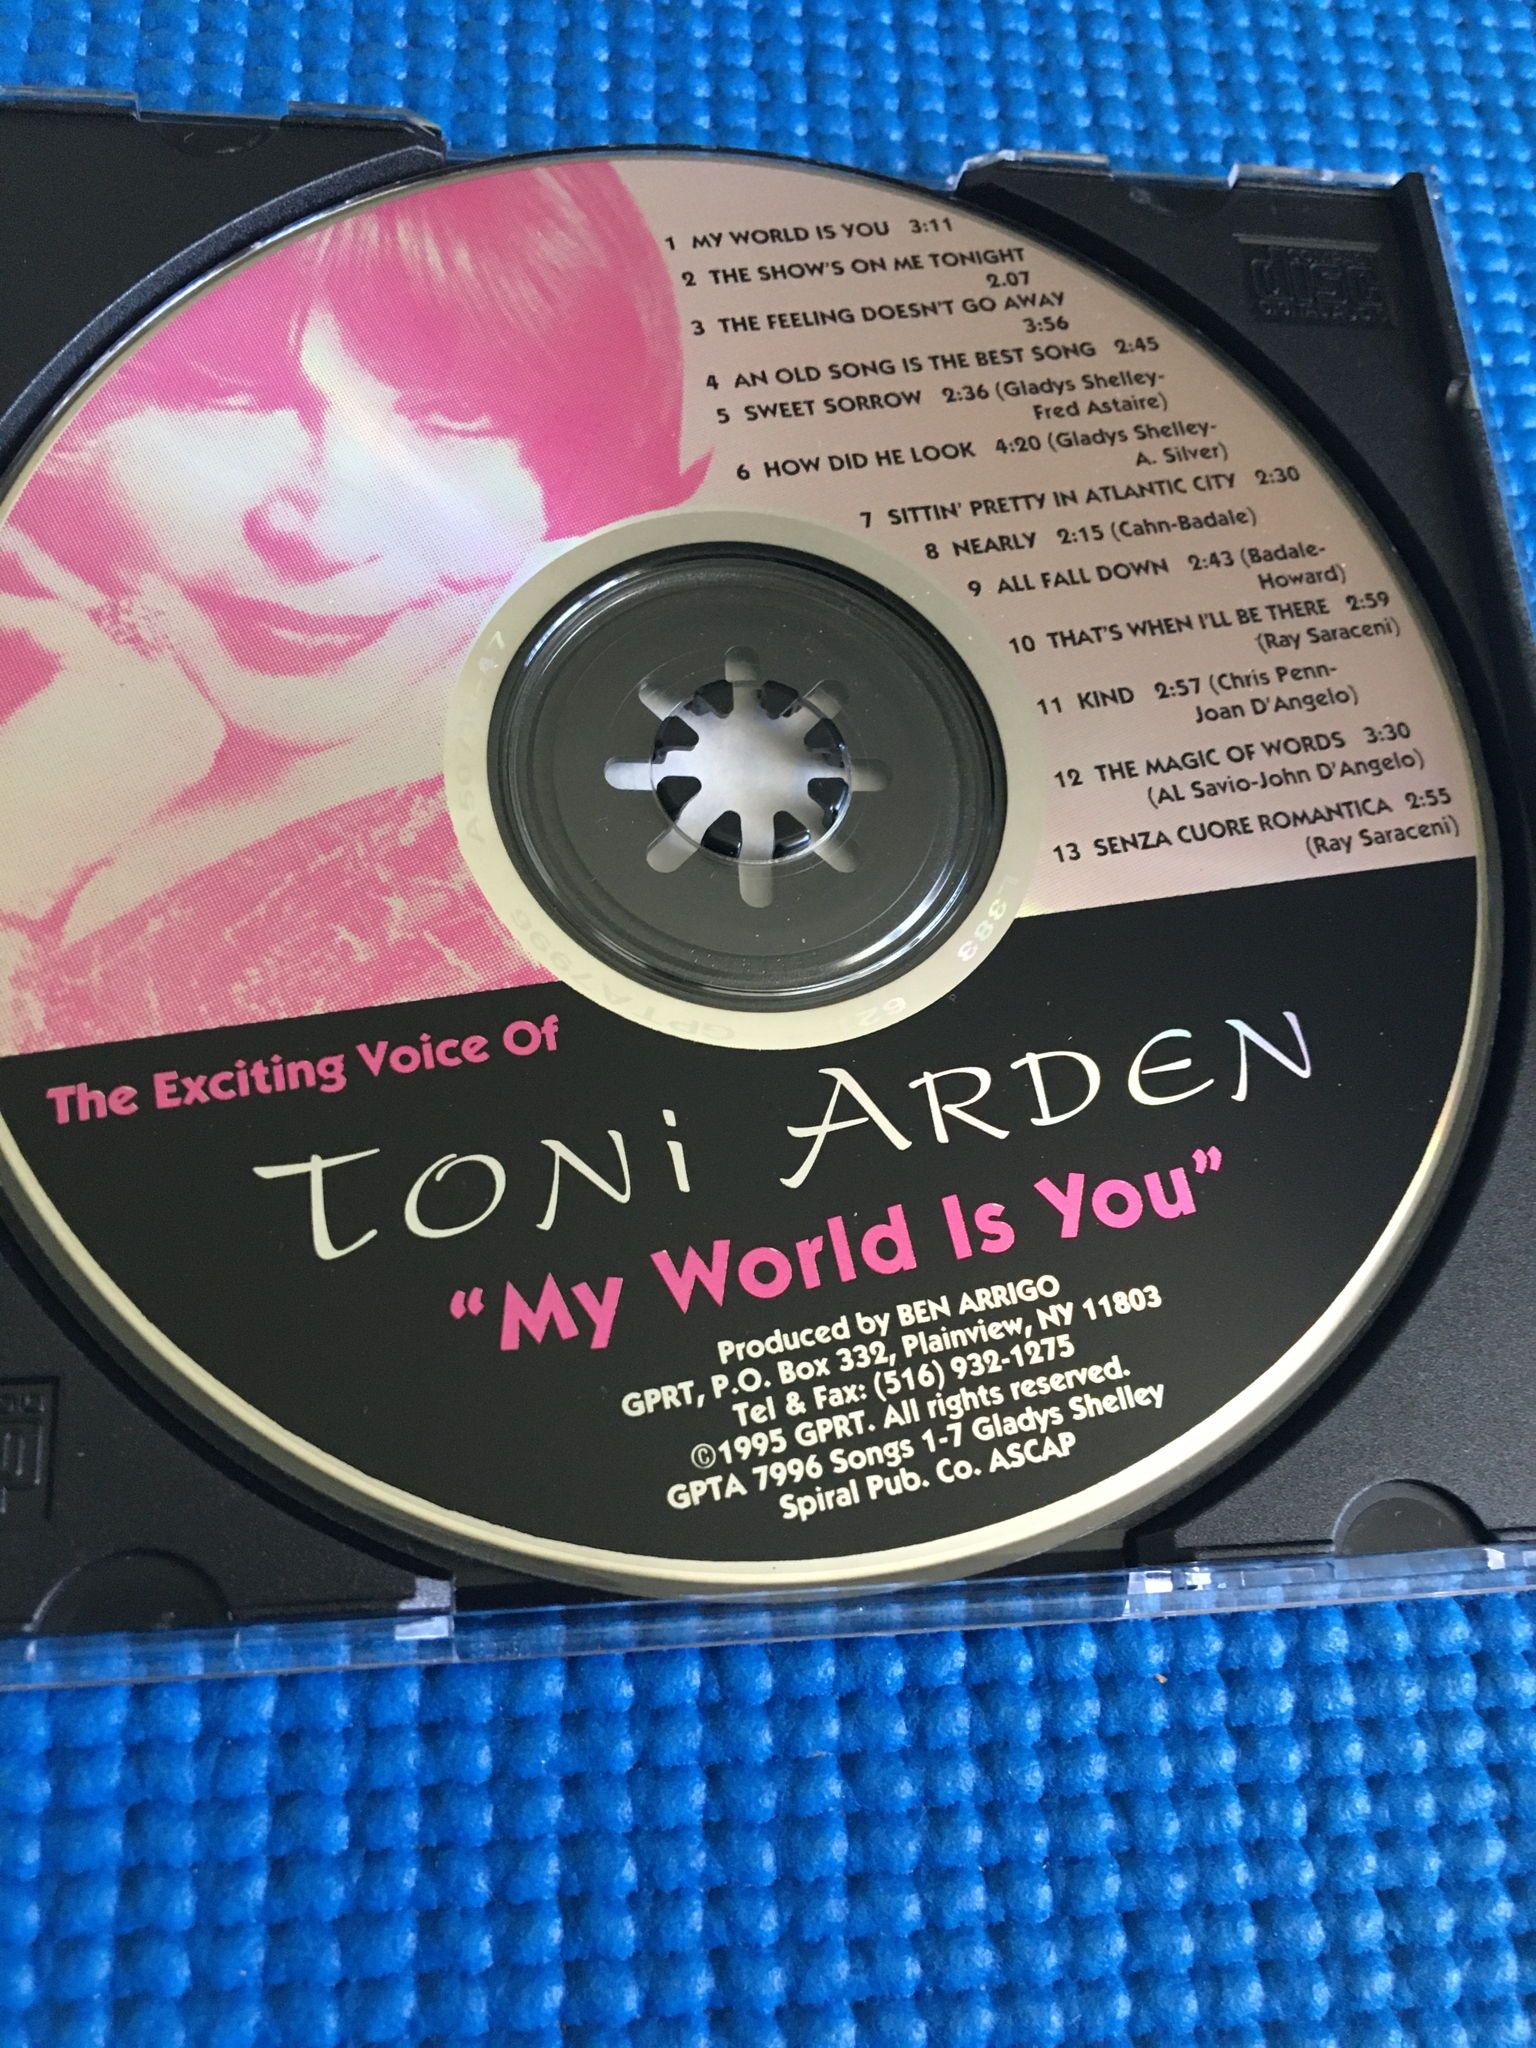 Toni Arden 2 cds The exciting voice and I can Dream Can... 8